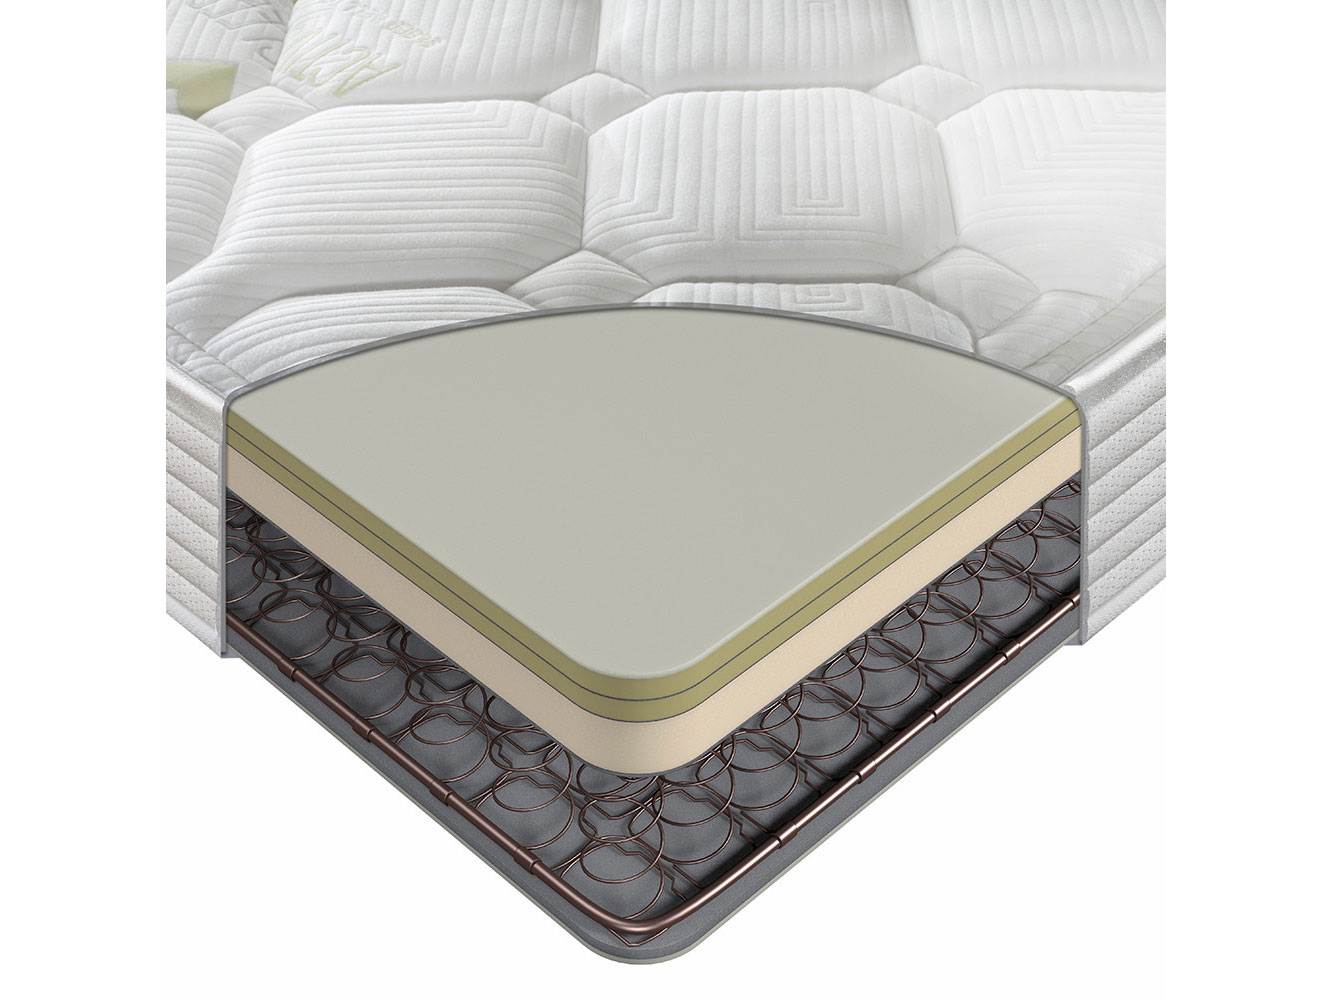 5ft King Size Sealy ActivSleep Ortho Posture Firm Support Mattress